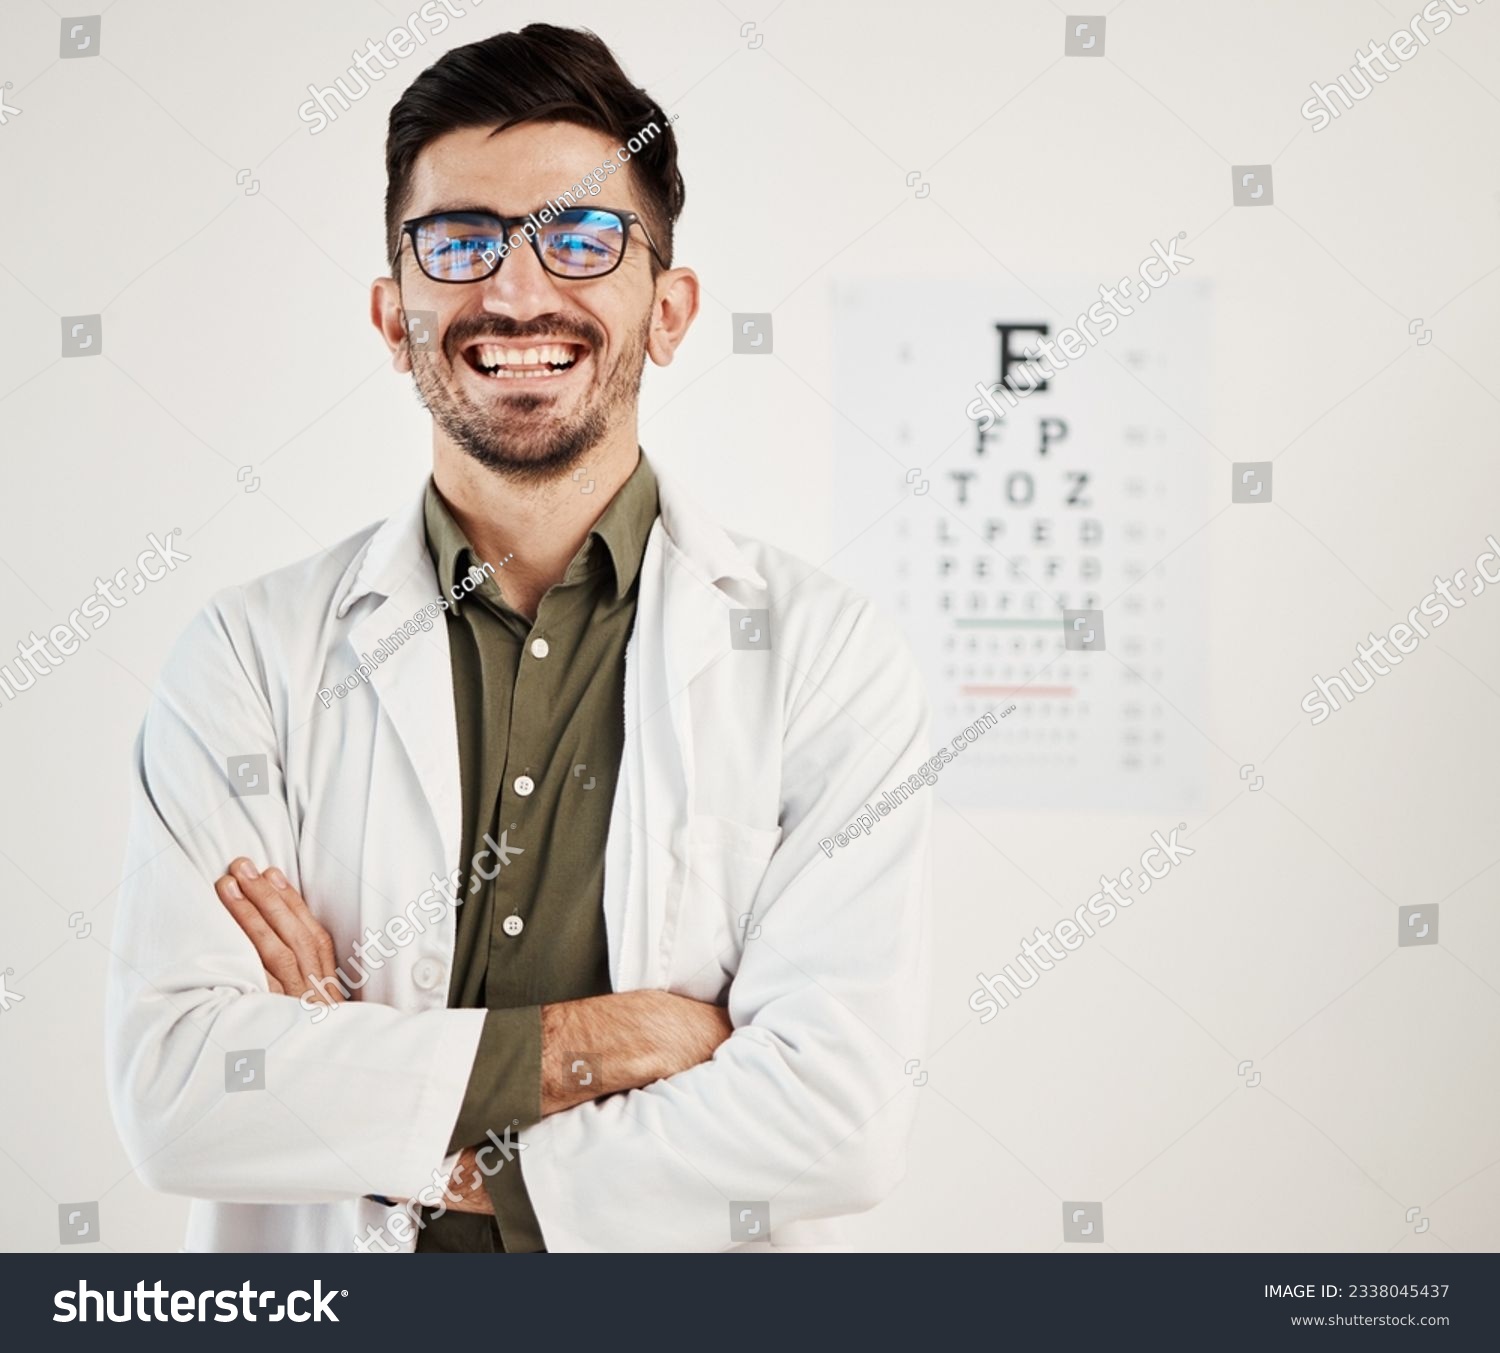 Eye exam, arms crossed and portrait of man optometrist with smile, confidence and friendly service in consultation office. Ophthalmology, face and happy male eye expert proud of vision testing career #2338045437